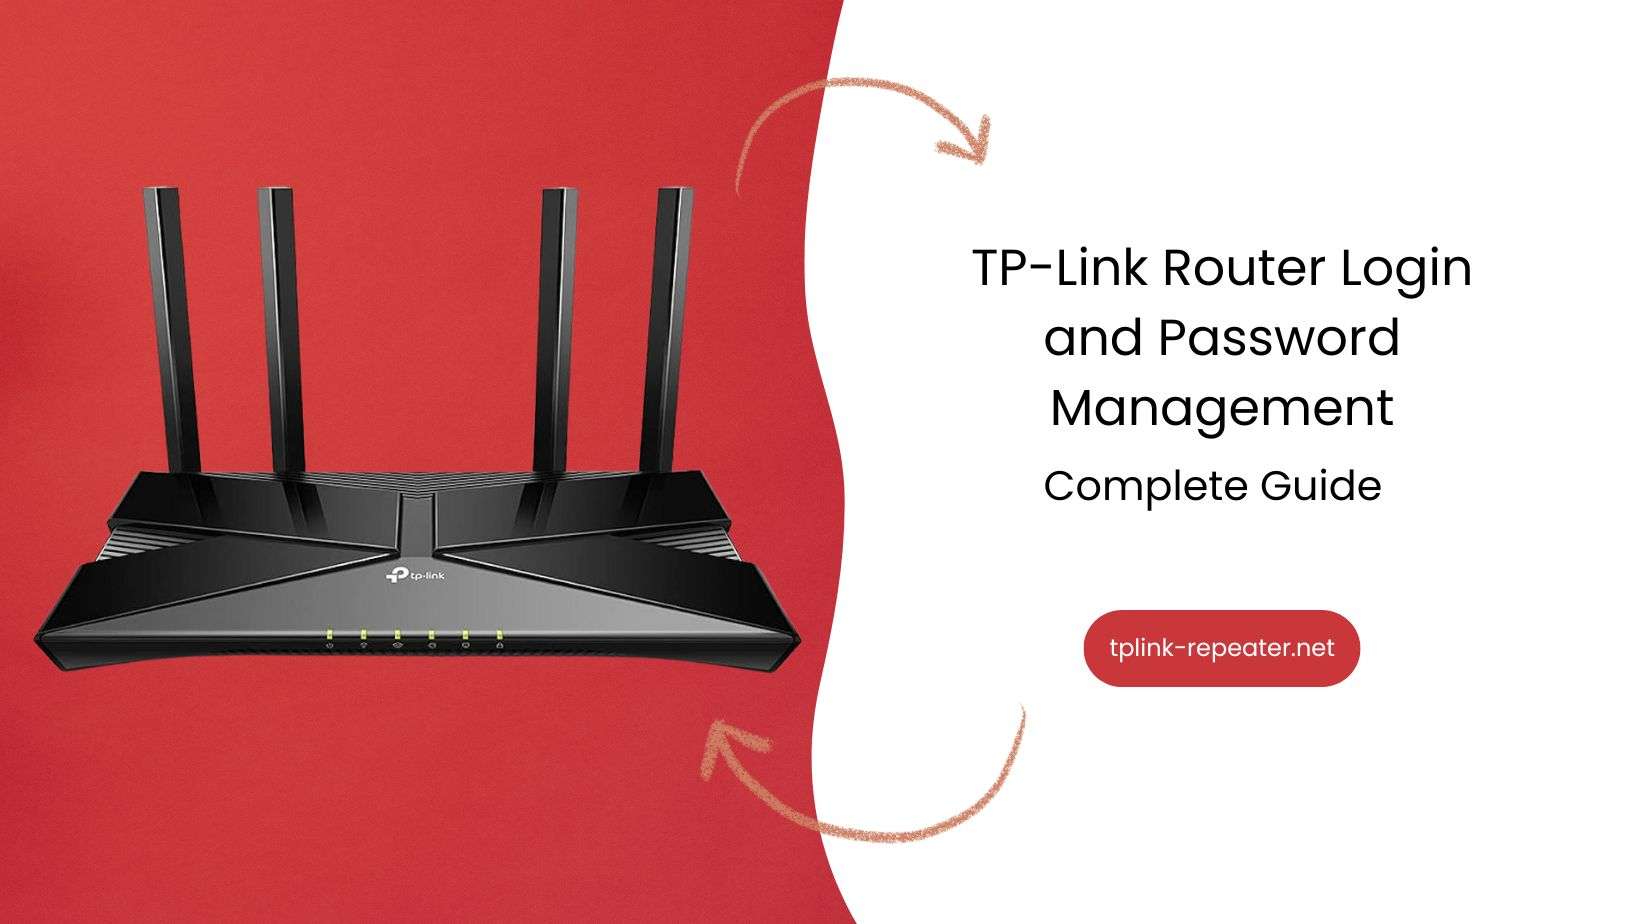 TP-Link Router Login and Password